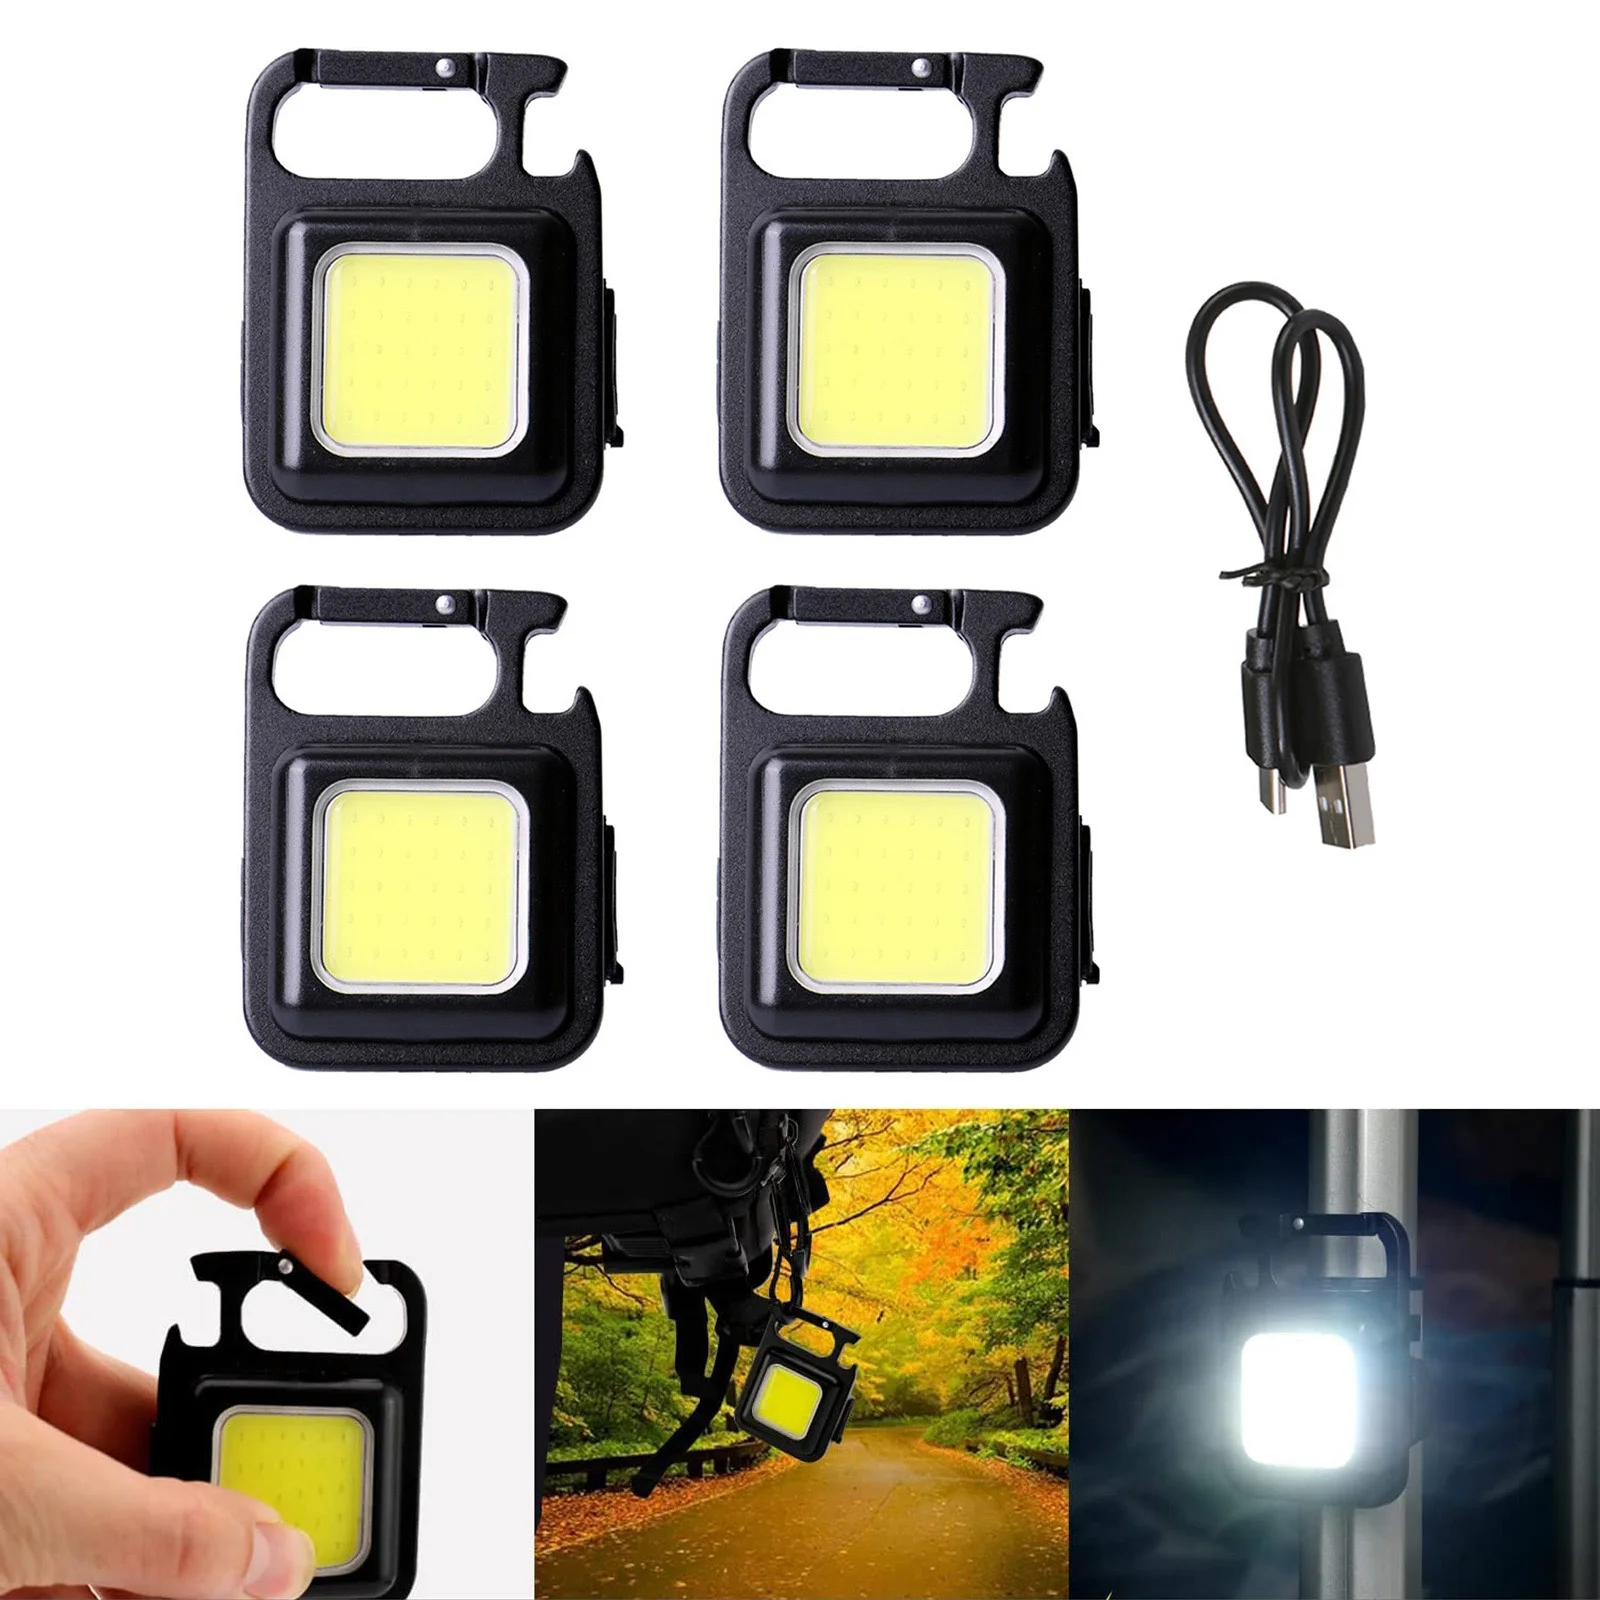 4pcs Mini LED Keychain Light Mutifuction Portable USB Rechargeable Pocket Work Lamp With Corkscrew For Camping Fishing Climbing